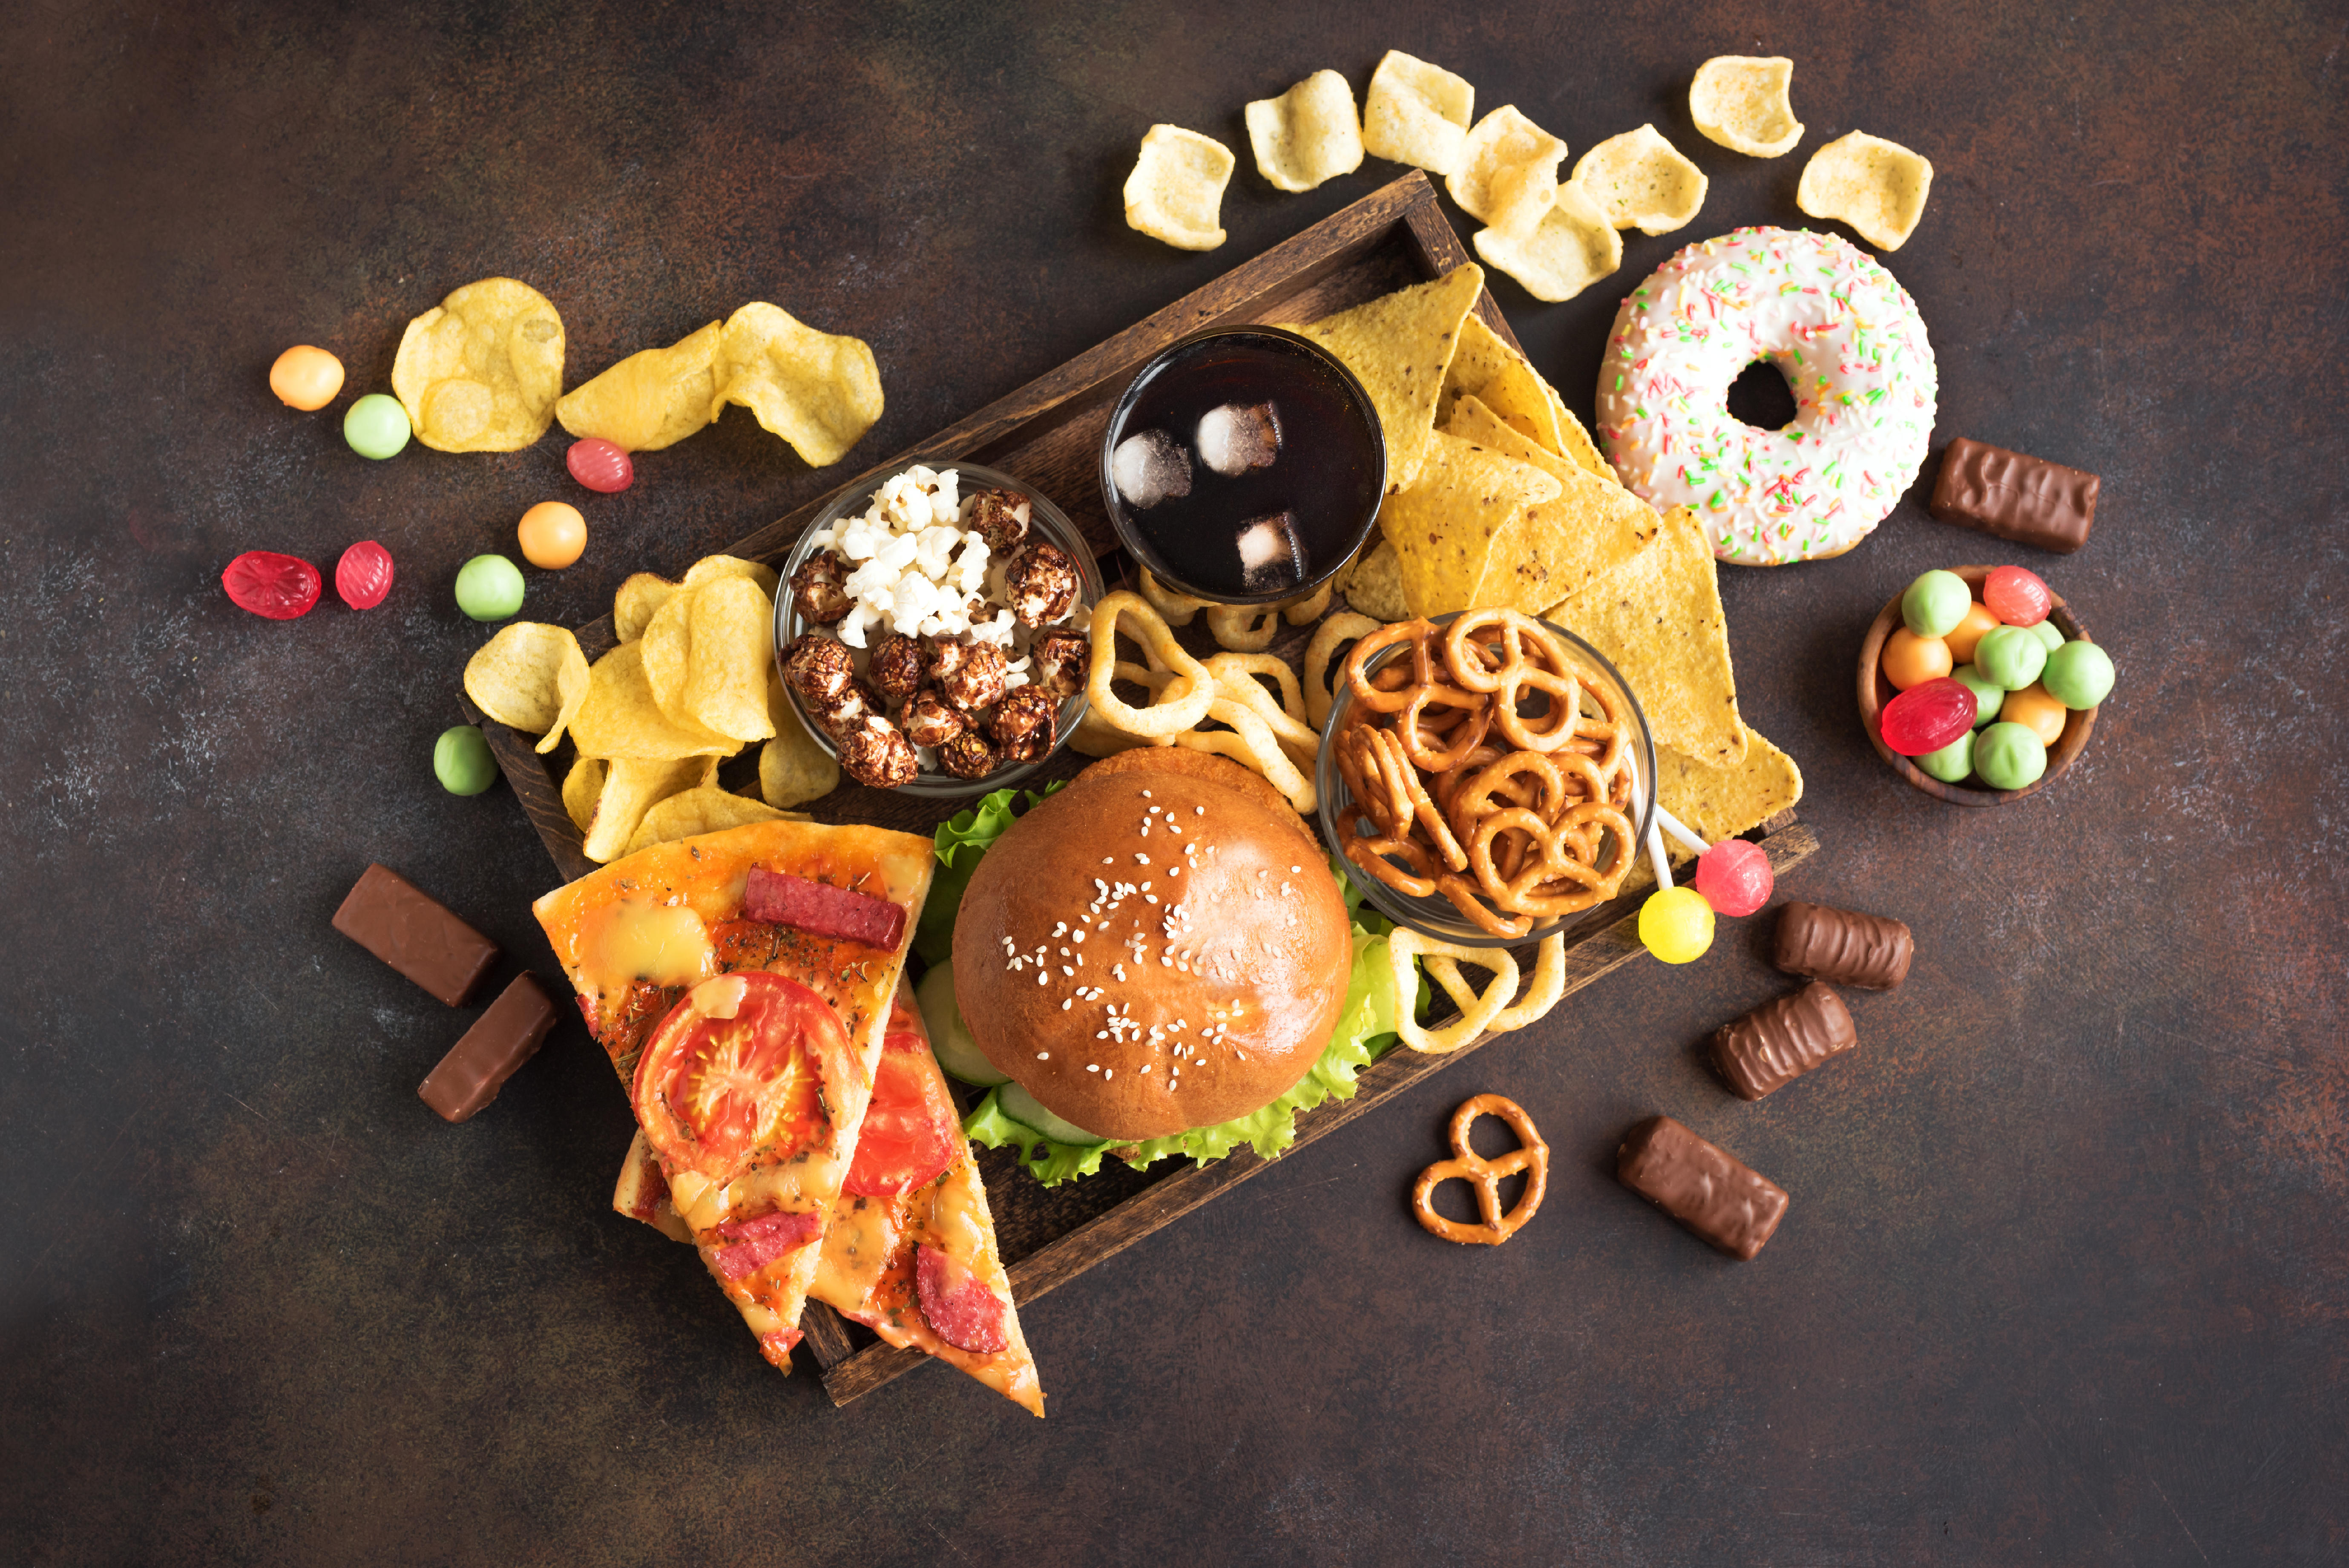 2A5EFD7 Assortment of Unhealthy Food, top view, copy space. Unhealthy eating, junk food concept.